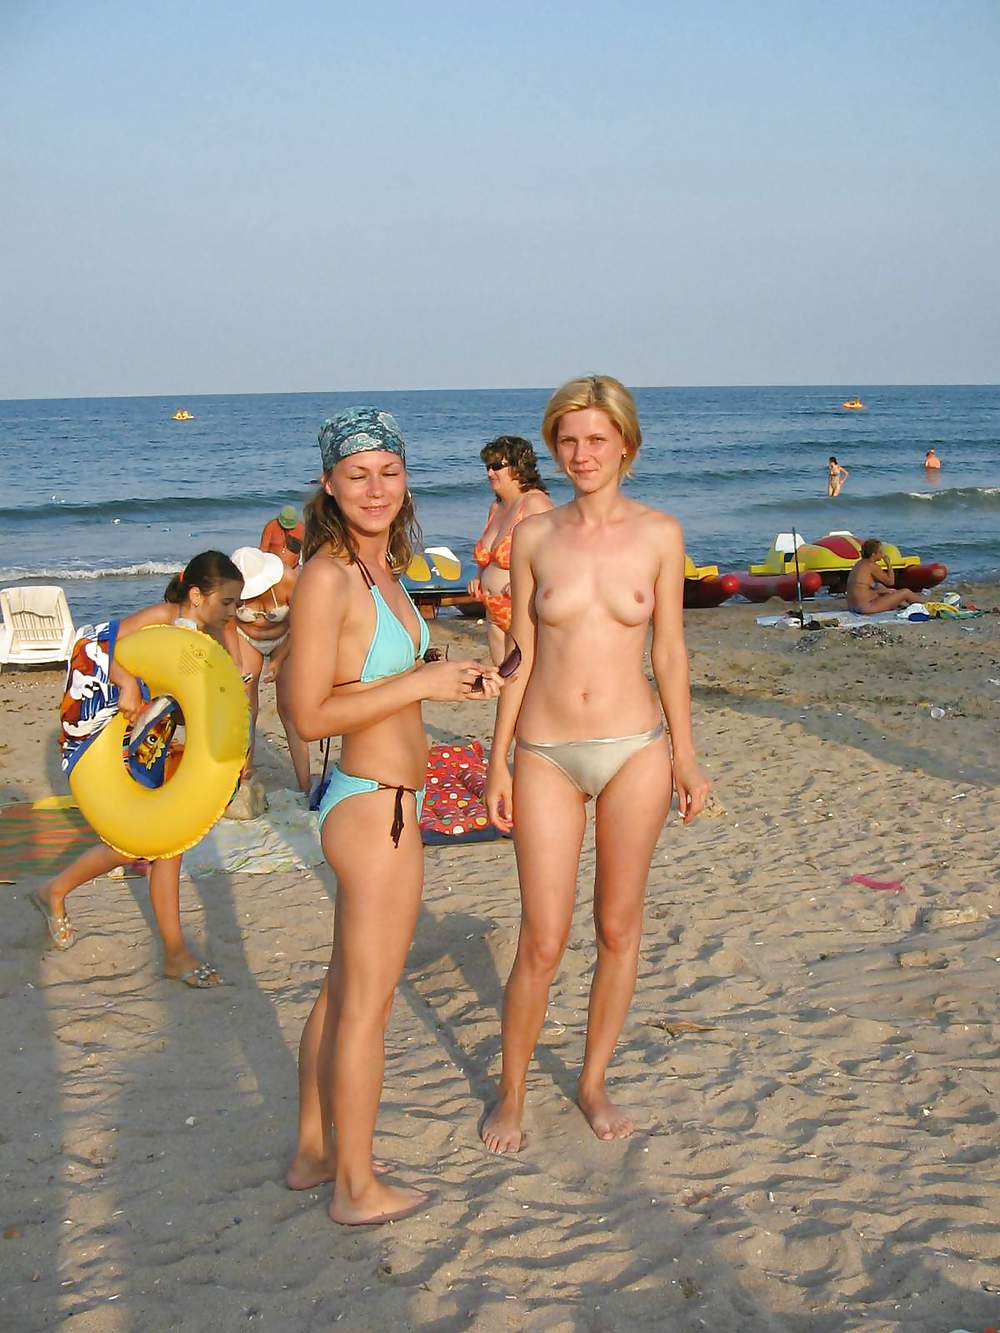 Amatoriale teenager in topless sulla spiaggia
 #12823903